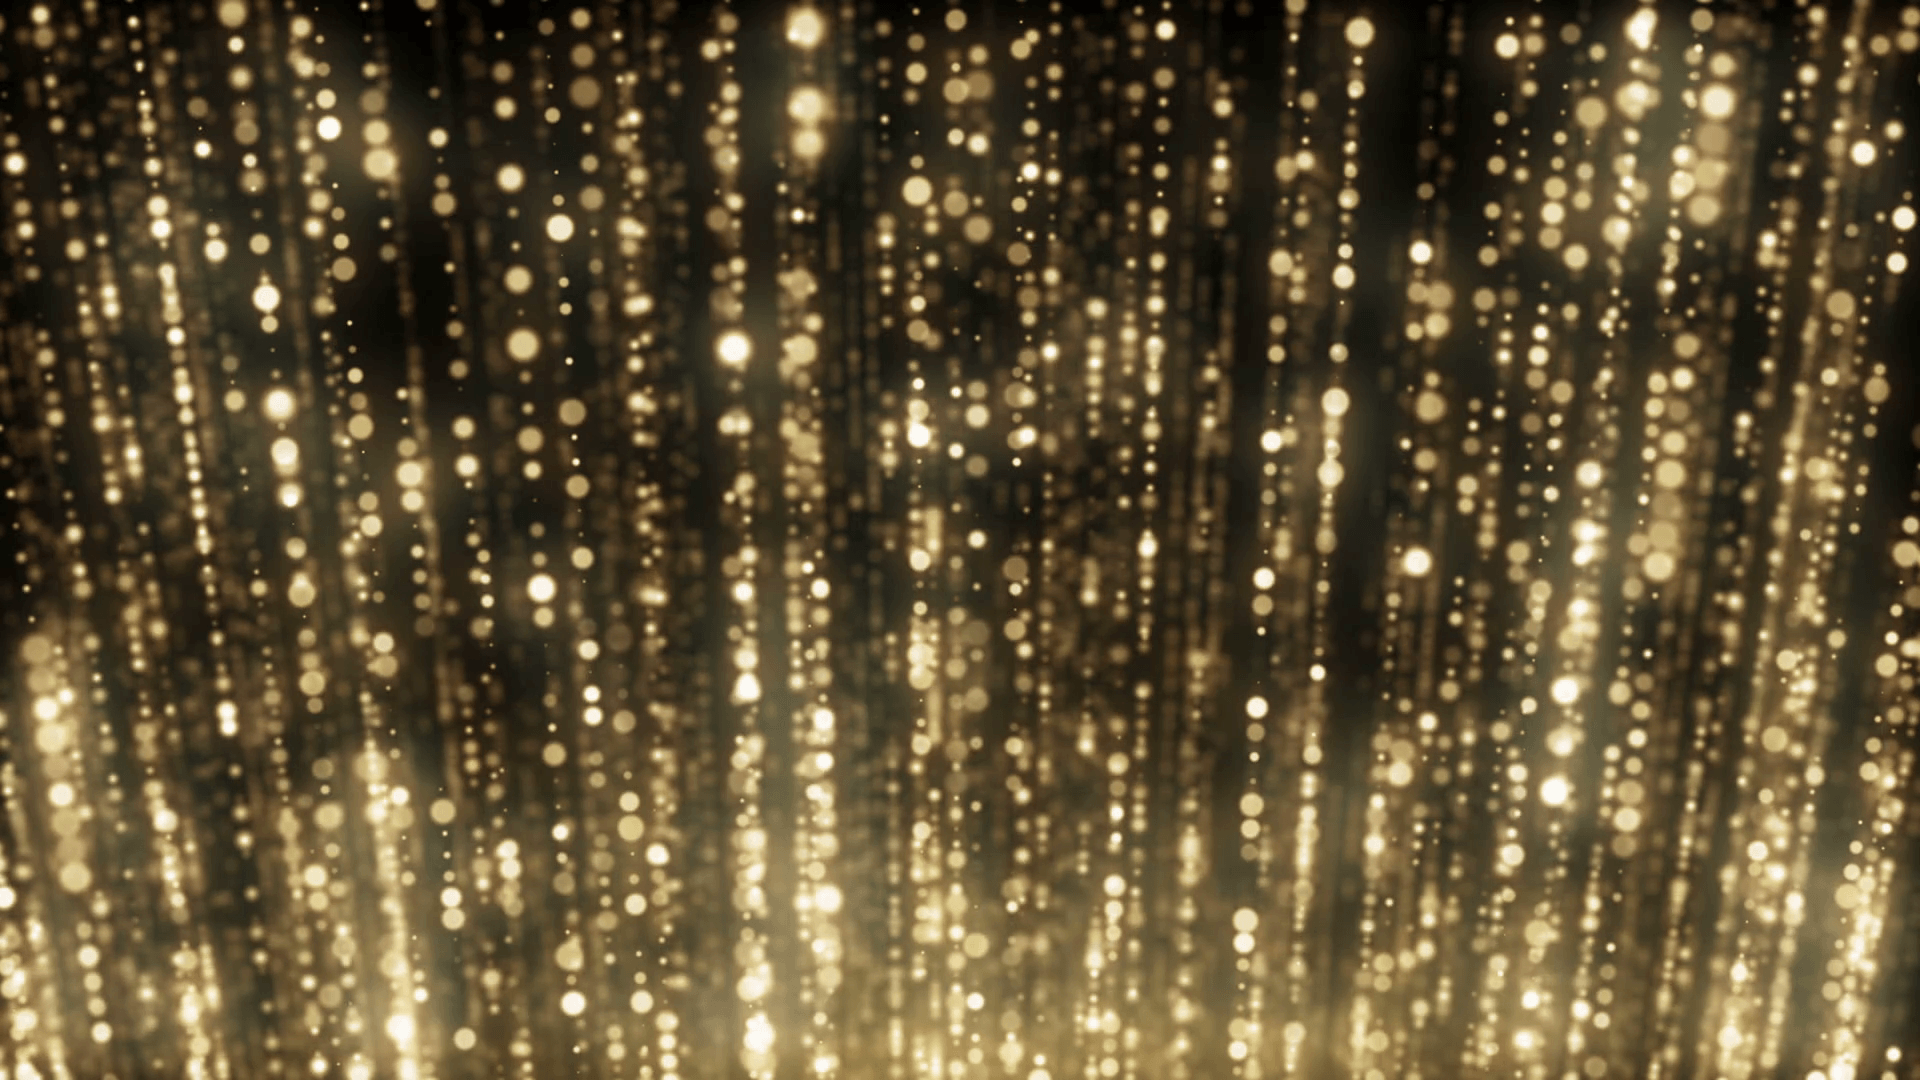 Particles Gold Glitter Bokeh Award Dust Abstract Background Loop 40